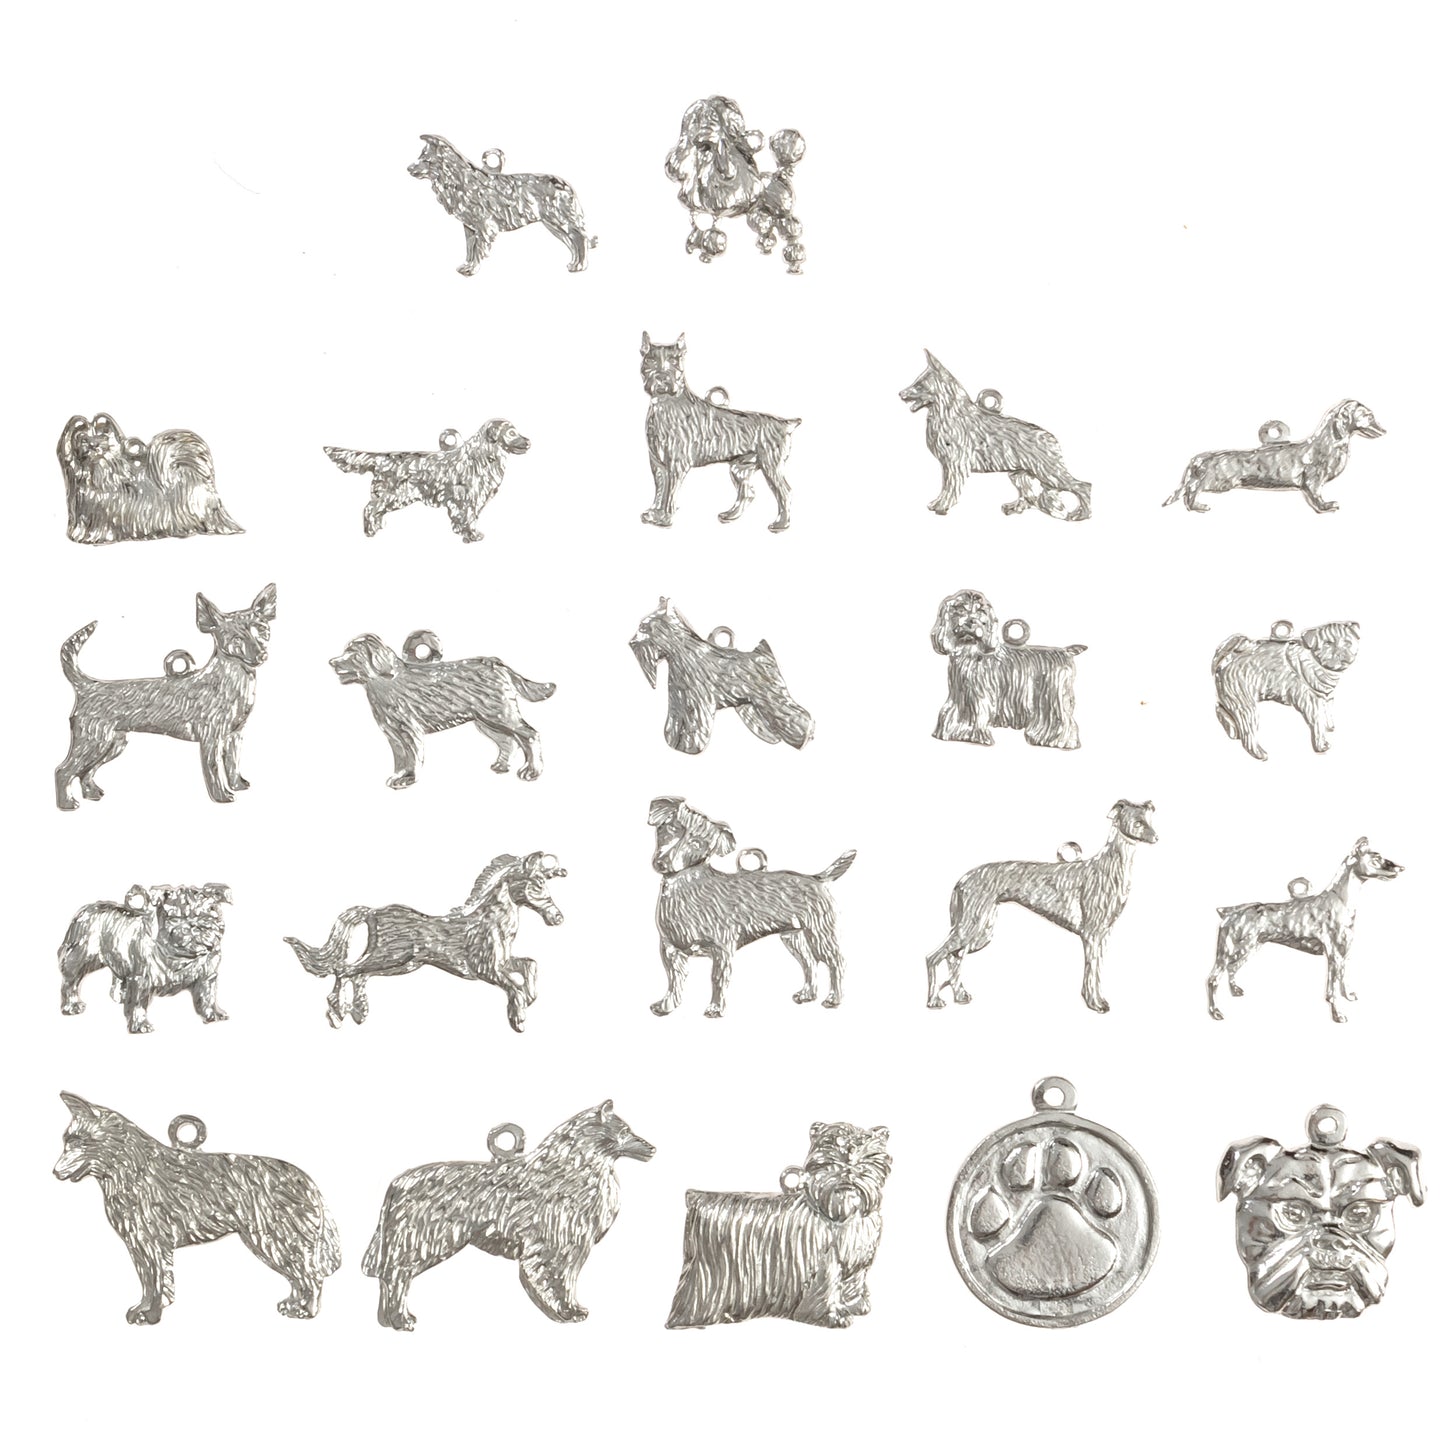 Dog Jewelry - Earrings - Necklace - Family Pet Gift - Wide Range of Dog Breeds